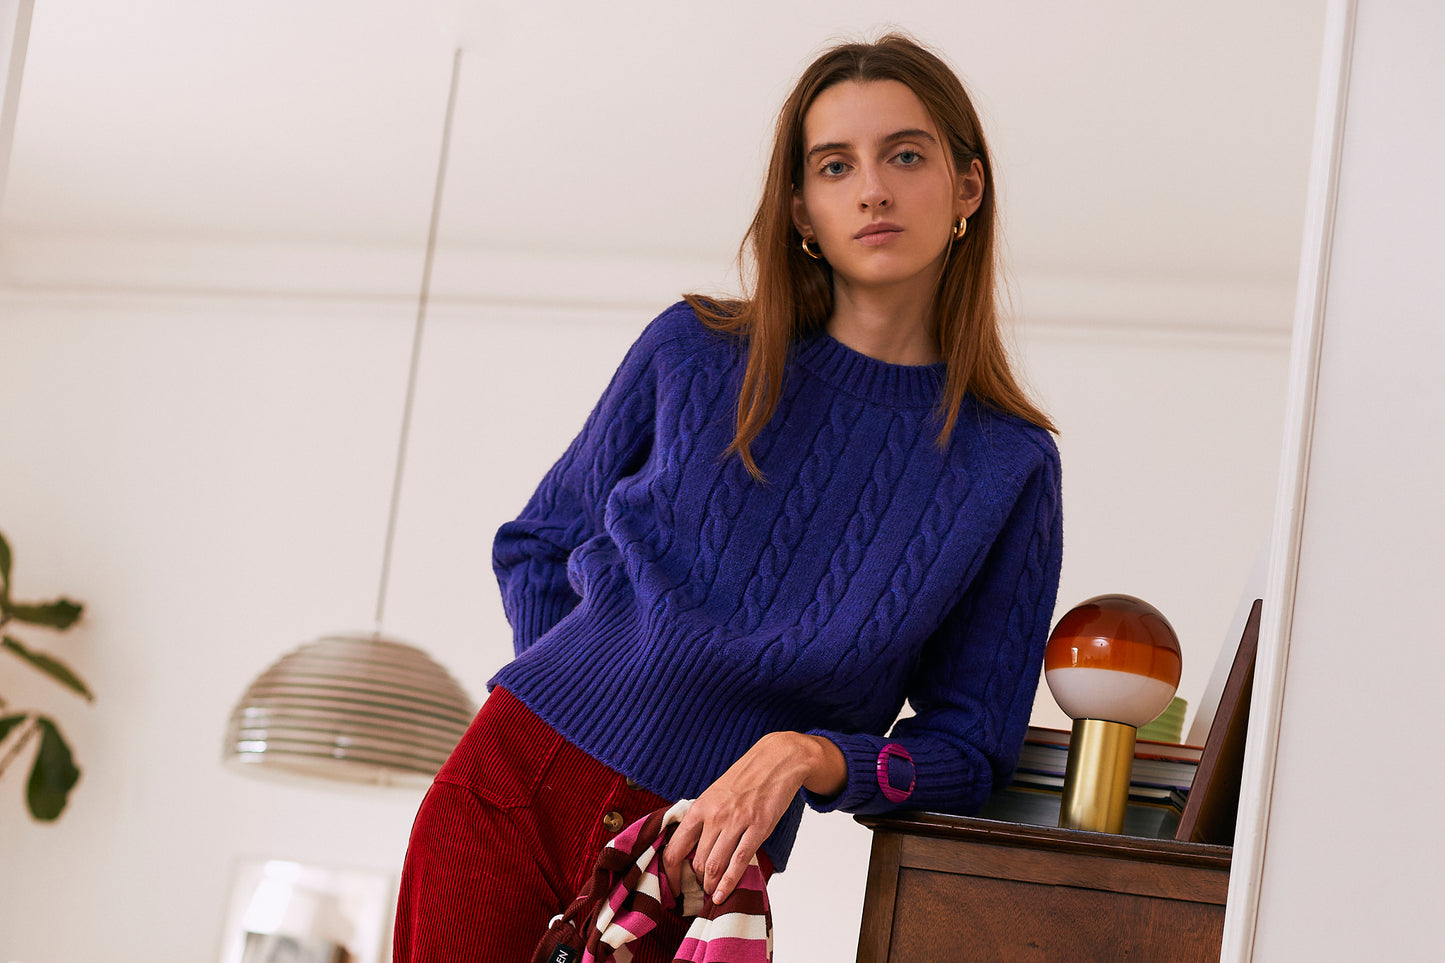 
                  
                    Clara Cable Knit Sweater Blue
                  
                